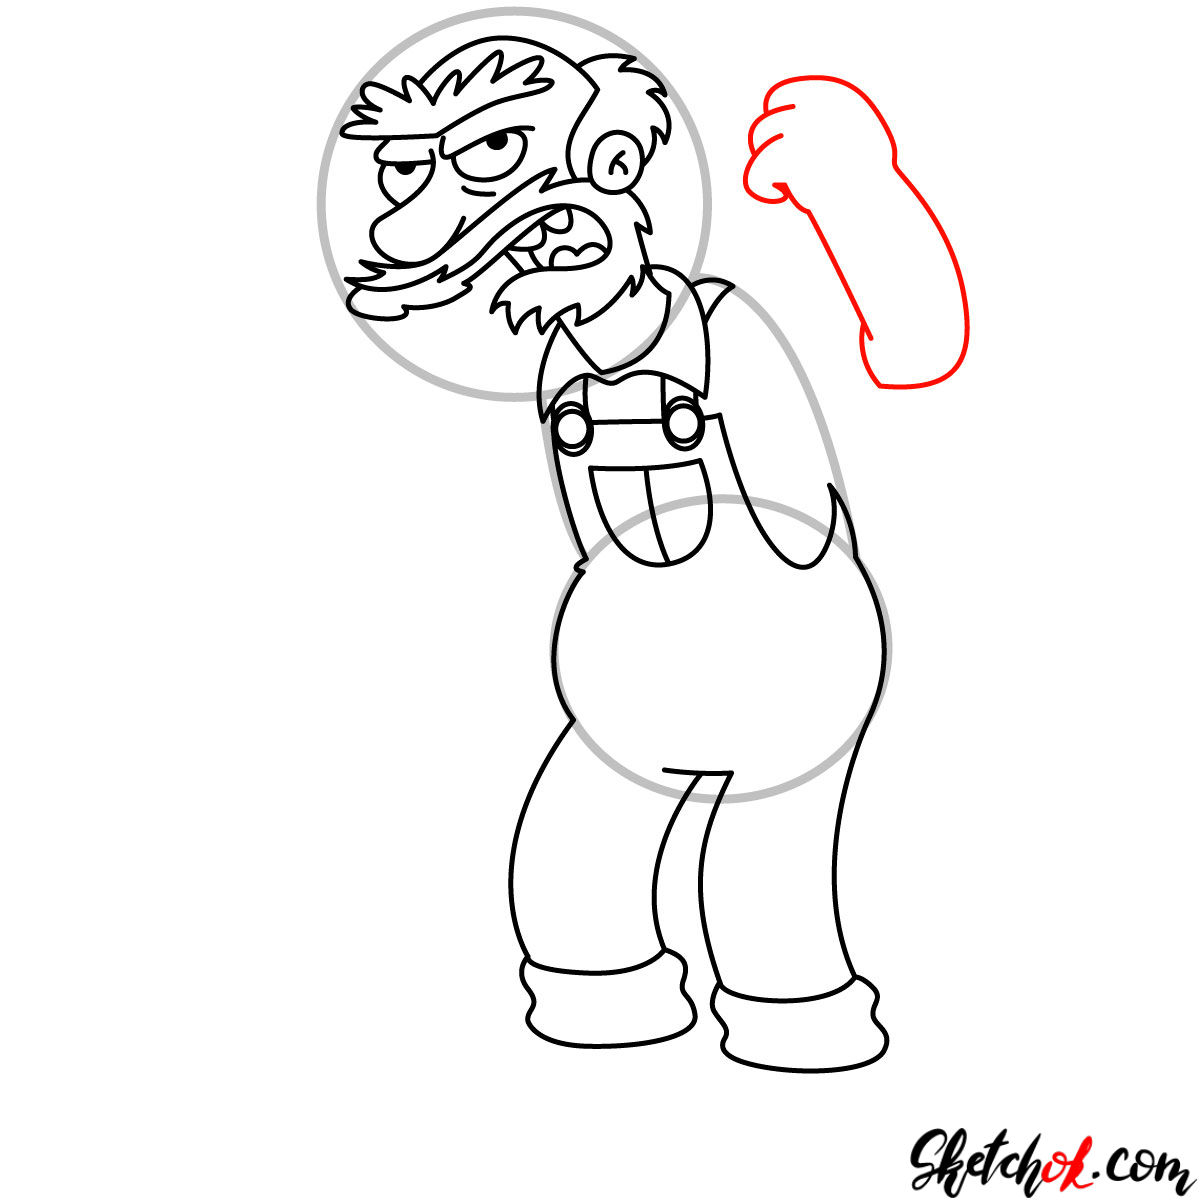 How to draw Groundskeeper Willie with a shovel - step 09